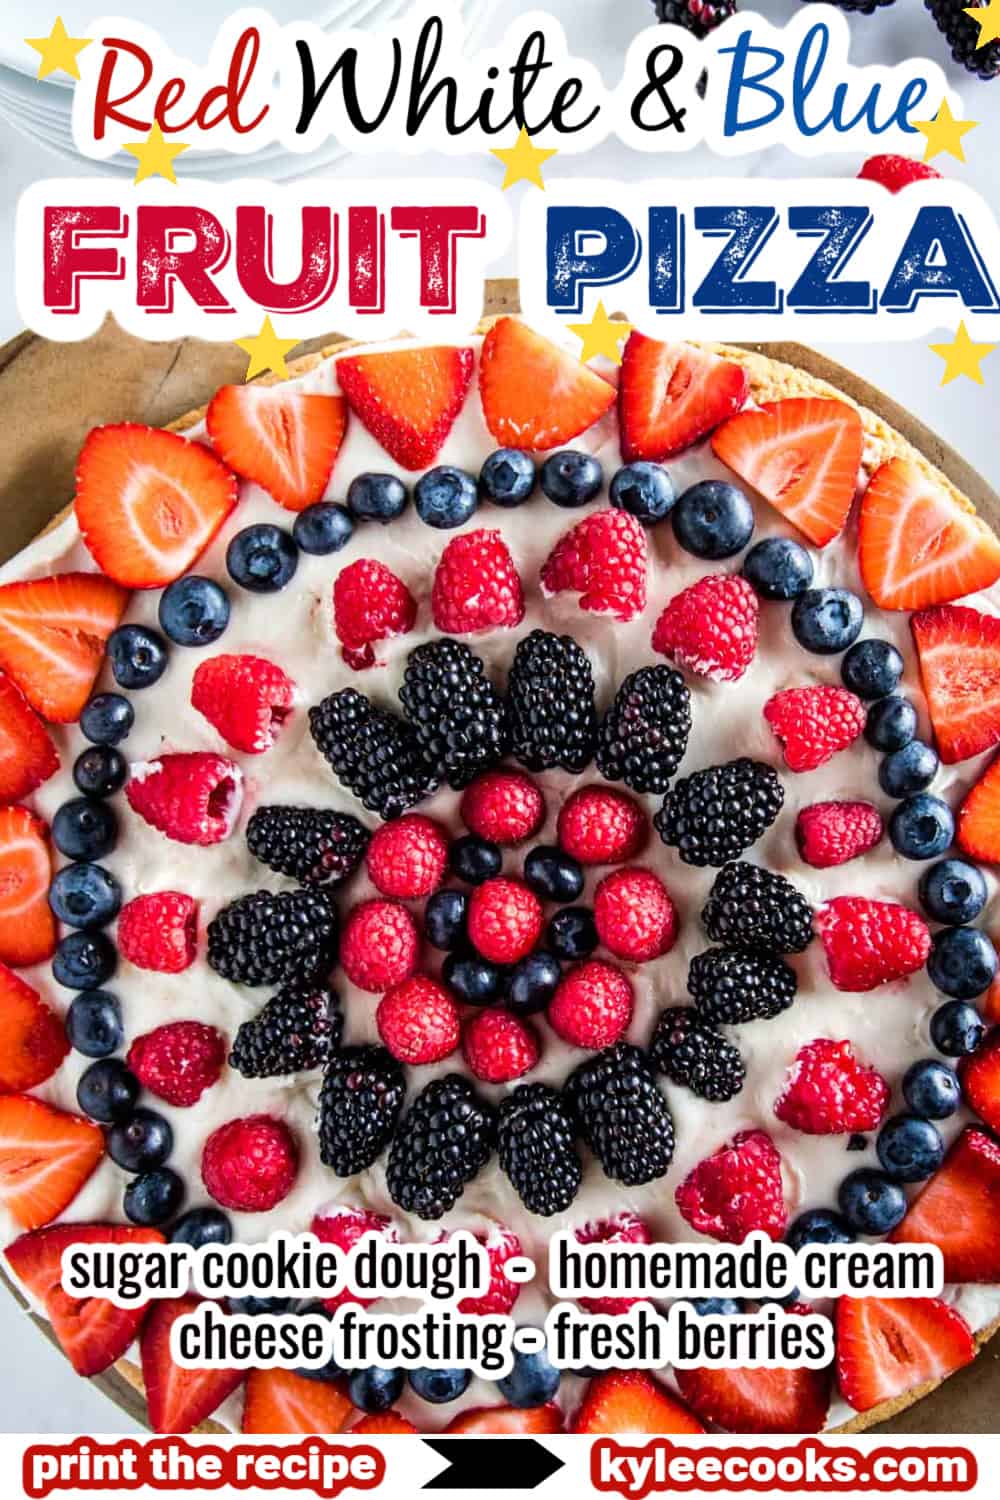 sugar cookie pizza with recipe name overlaid in text.